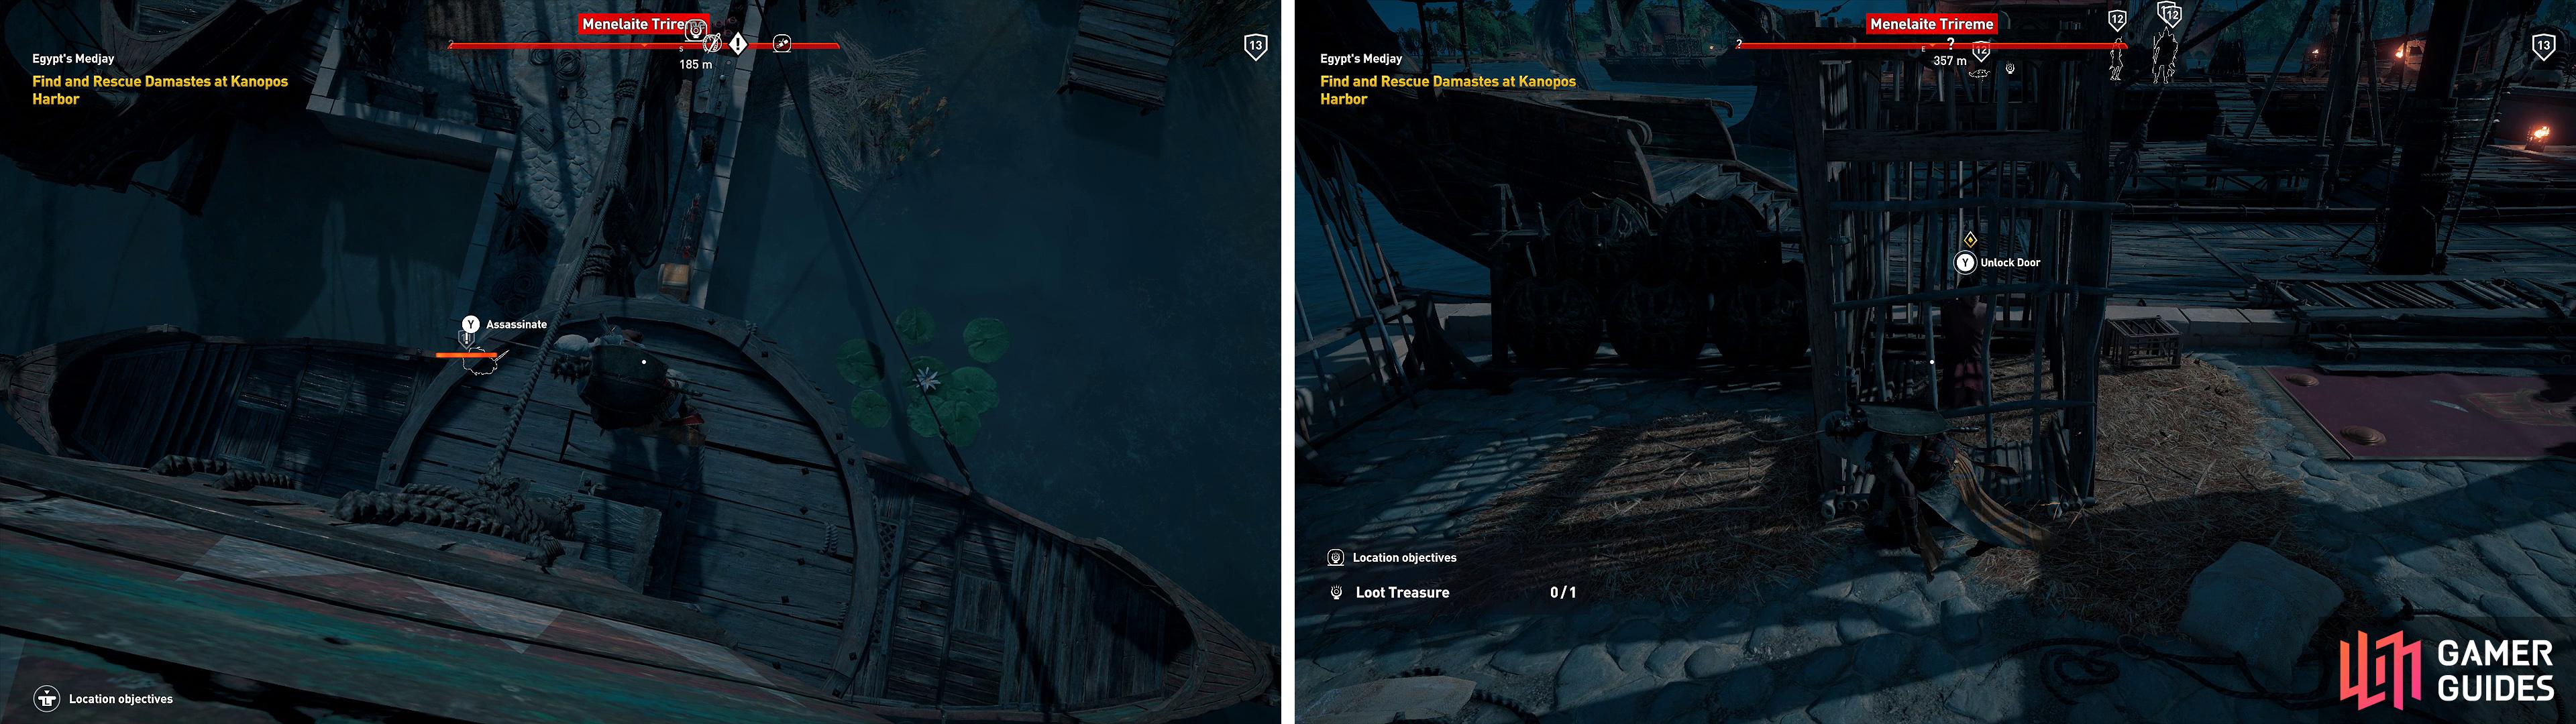 Use the masts of the ships to take out any soldiers (left) and survey the docks. Once done, unlock the cage for Damastes (right).